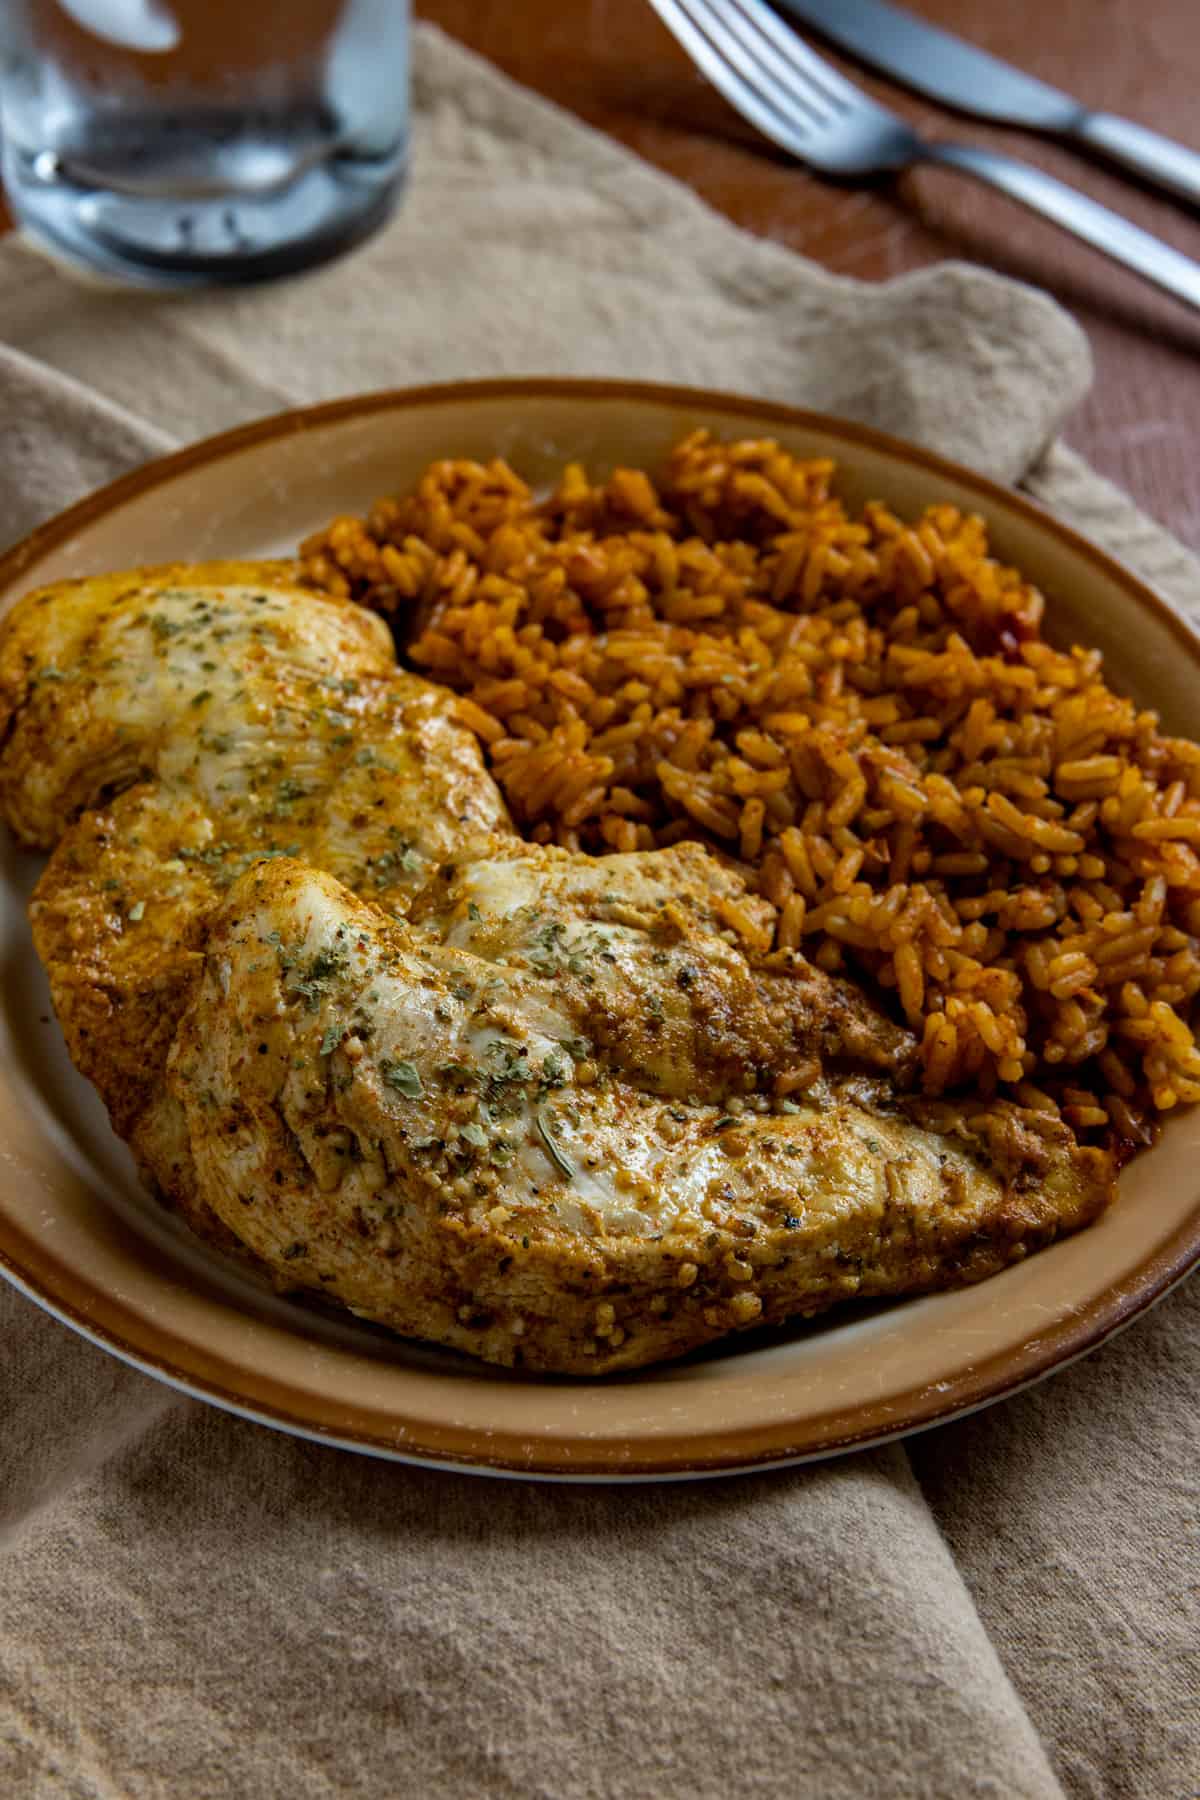 Baked chicken breast on brown plate with a side of Spanish rice.